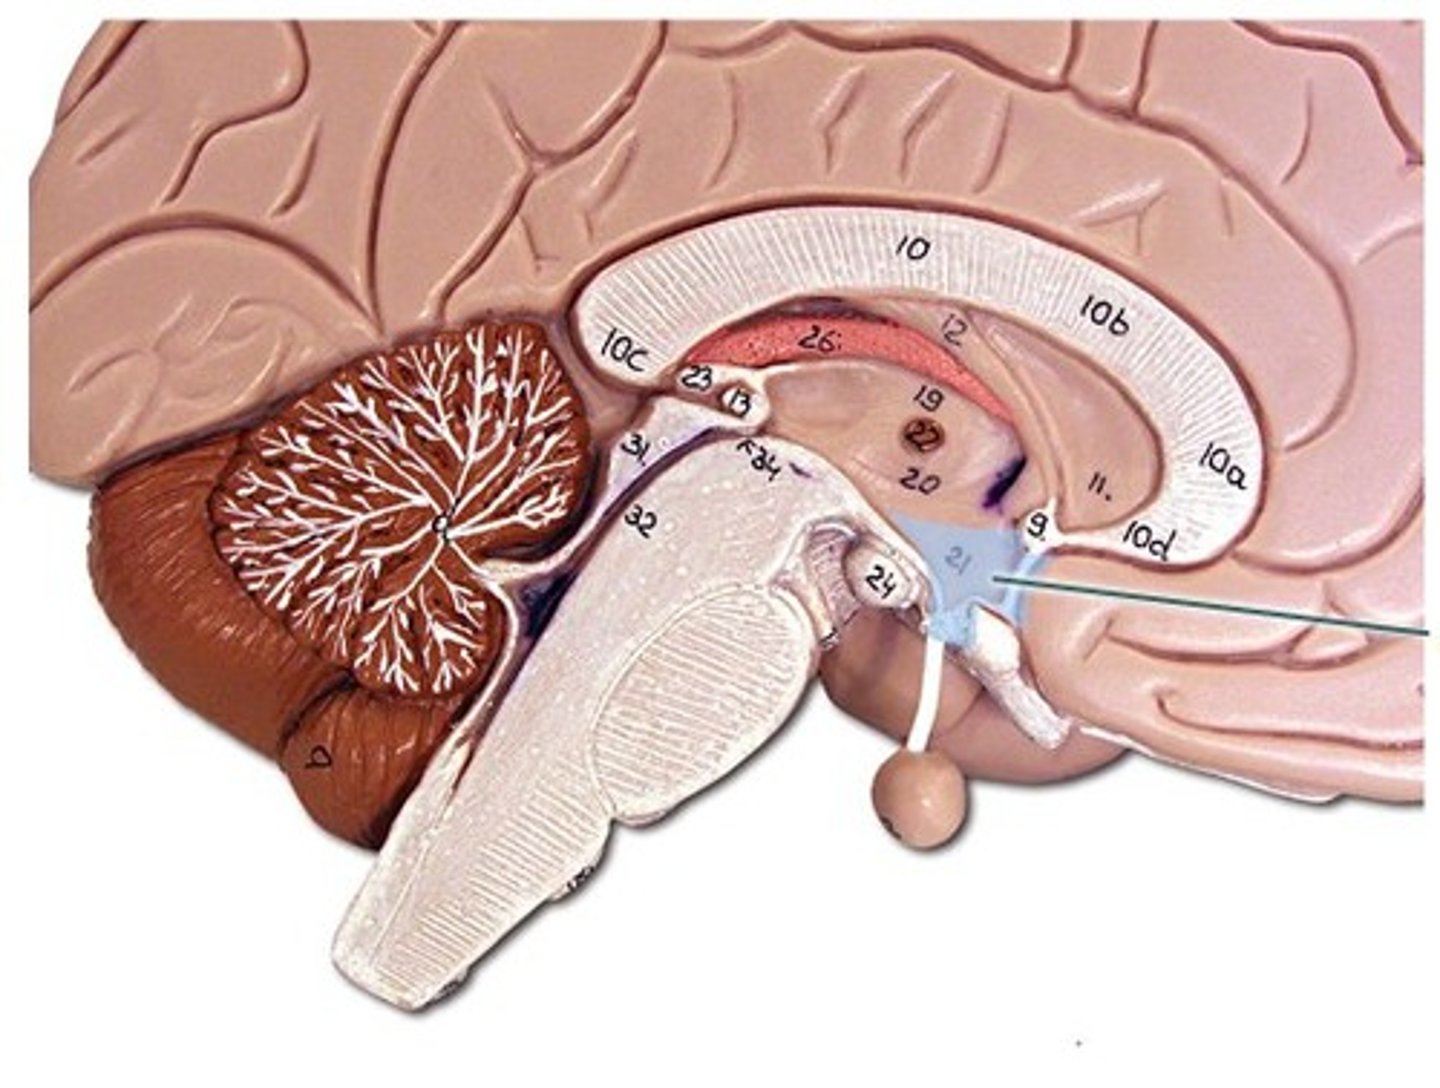 <p>structure in the limbic system responsible for directing several maintenance activities (eating, drinking, body temp); helps govern endocrine system via the pituitary gland</p>